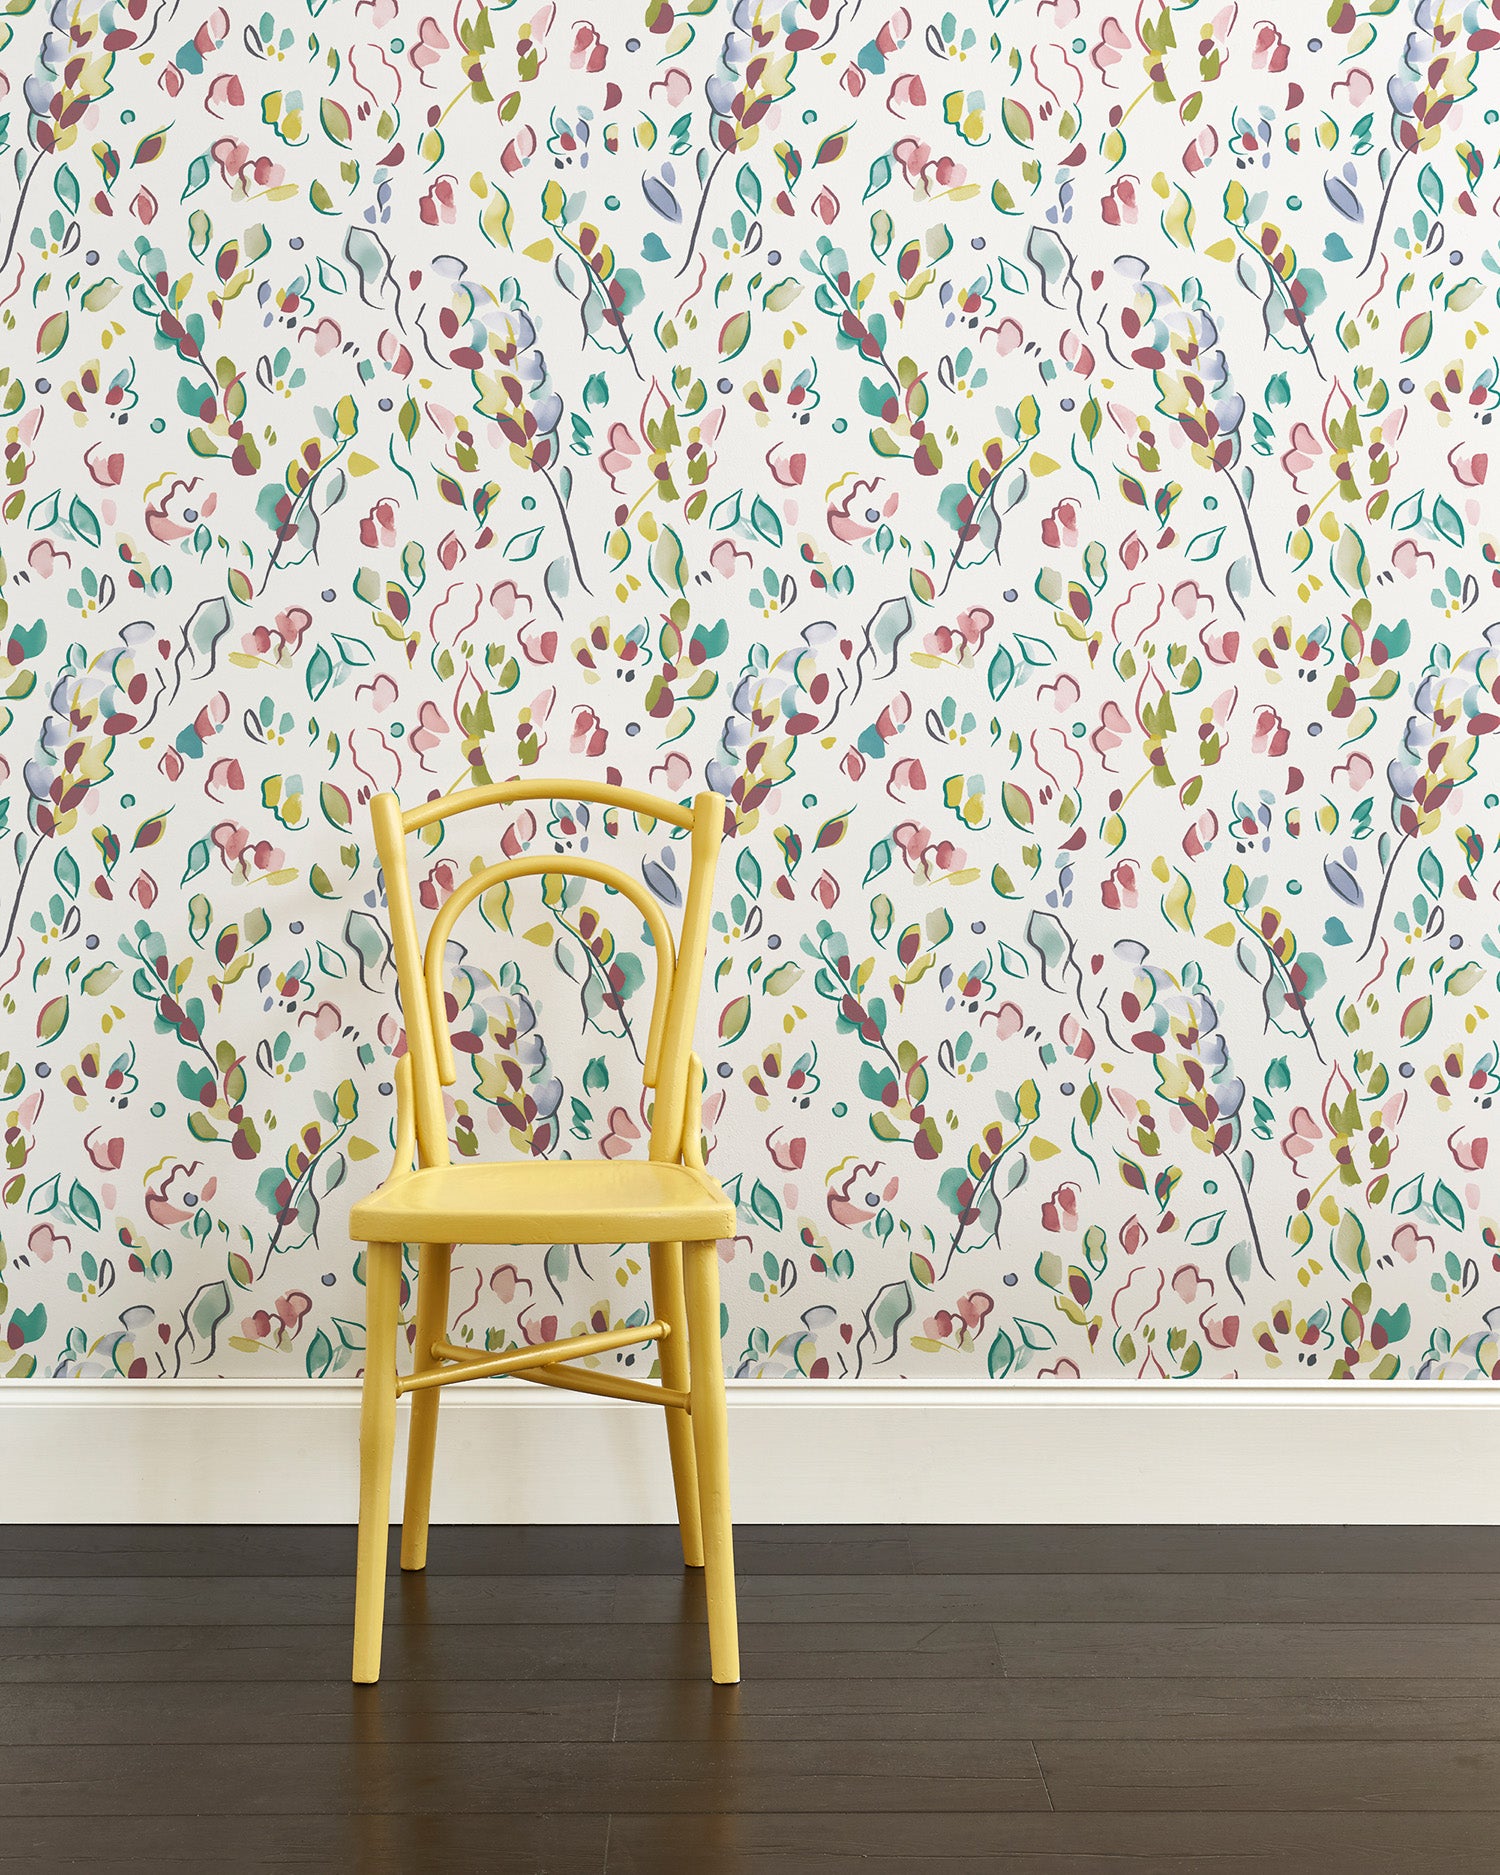 A yellow chair stands in front of a wall papered in a painterly leaf print in purple, blue, green and white.